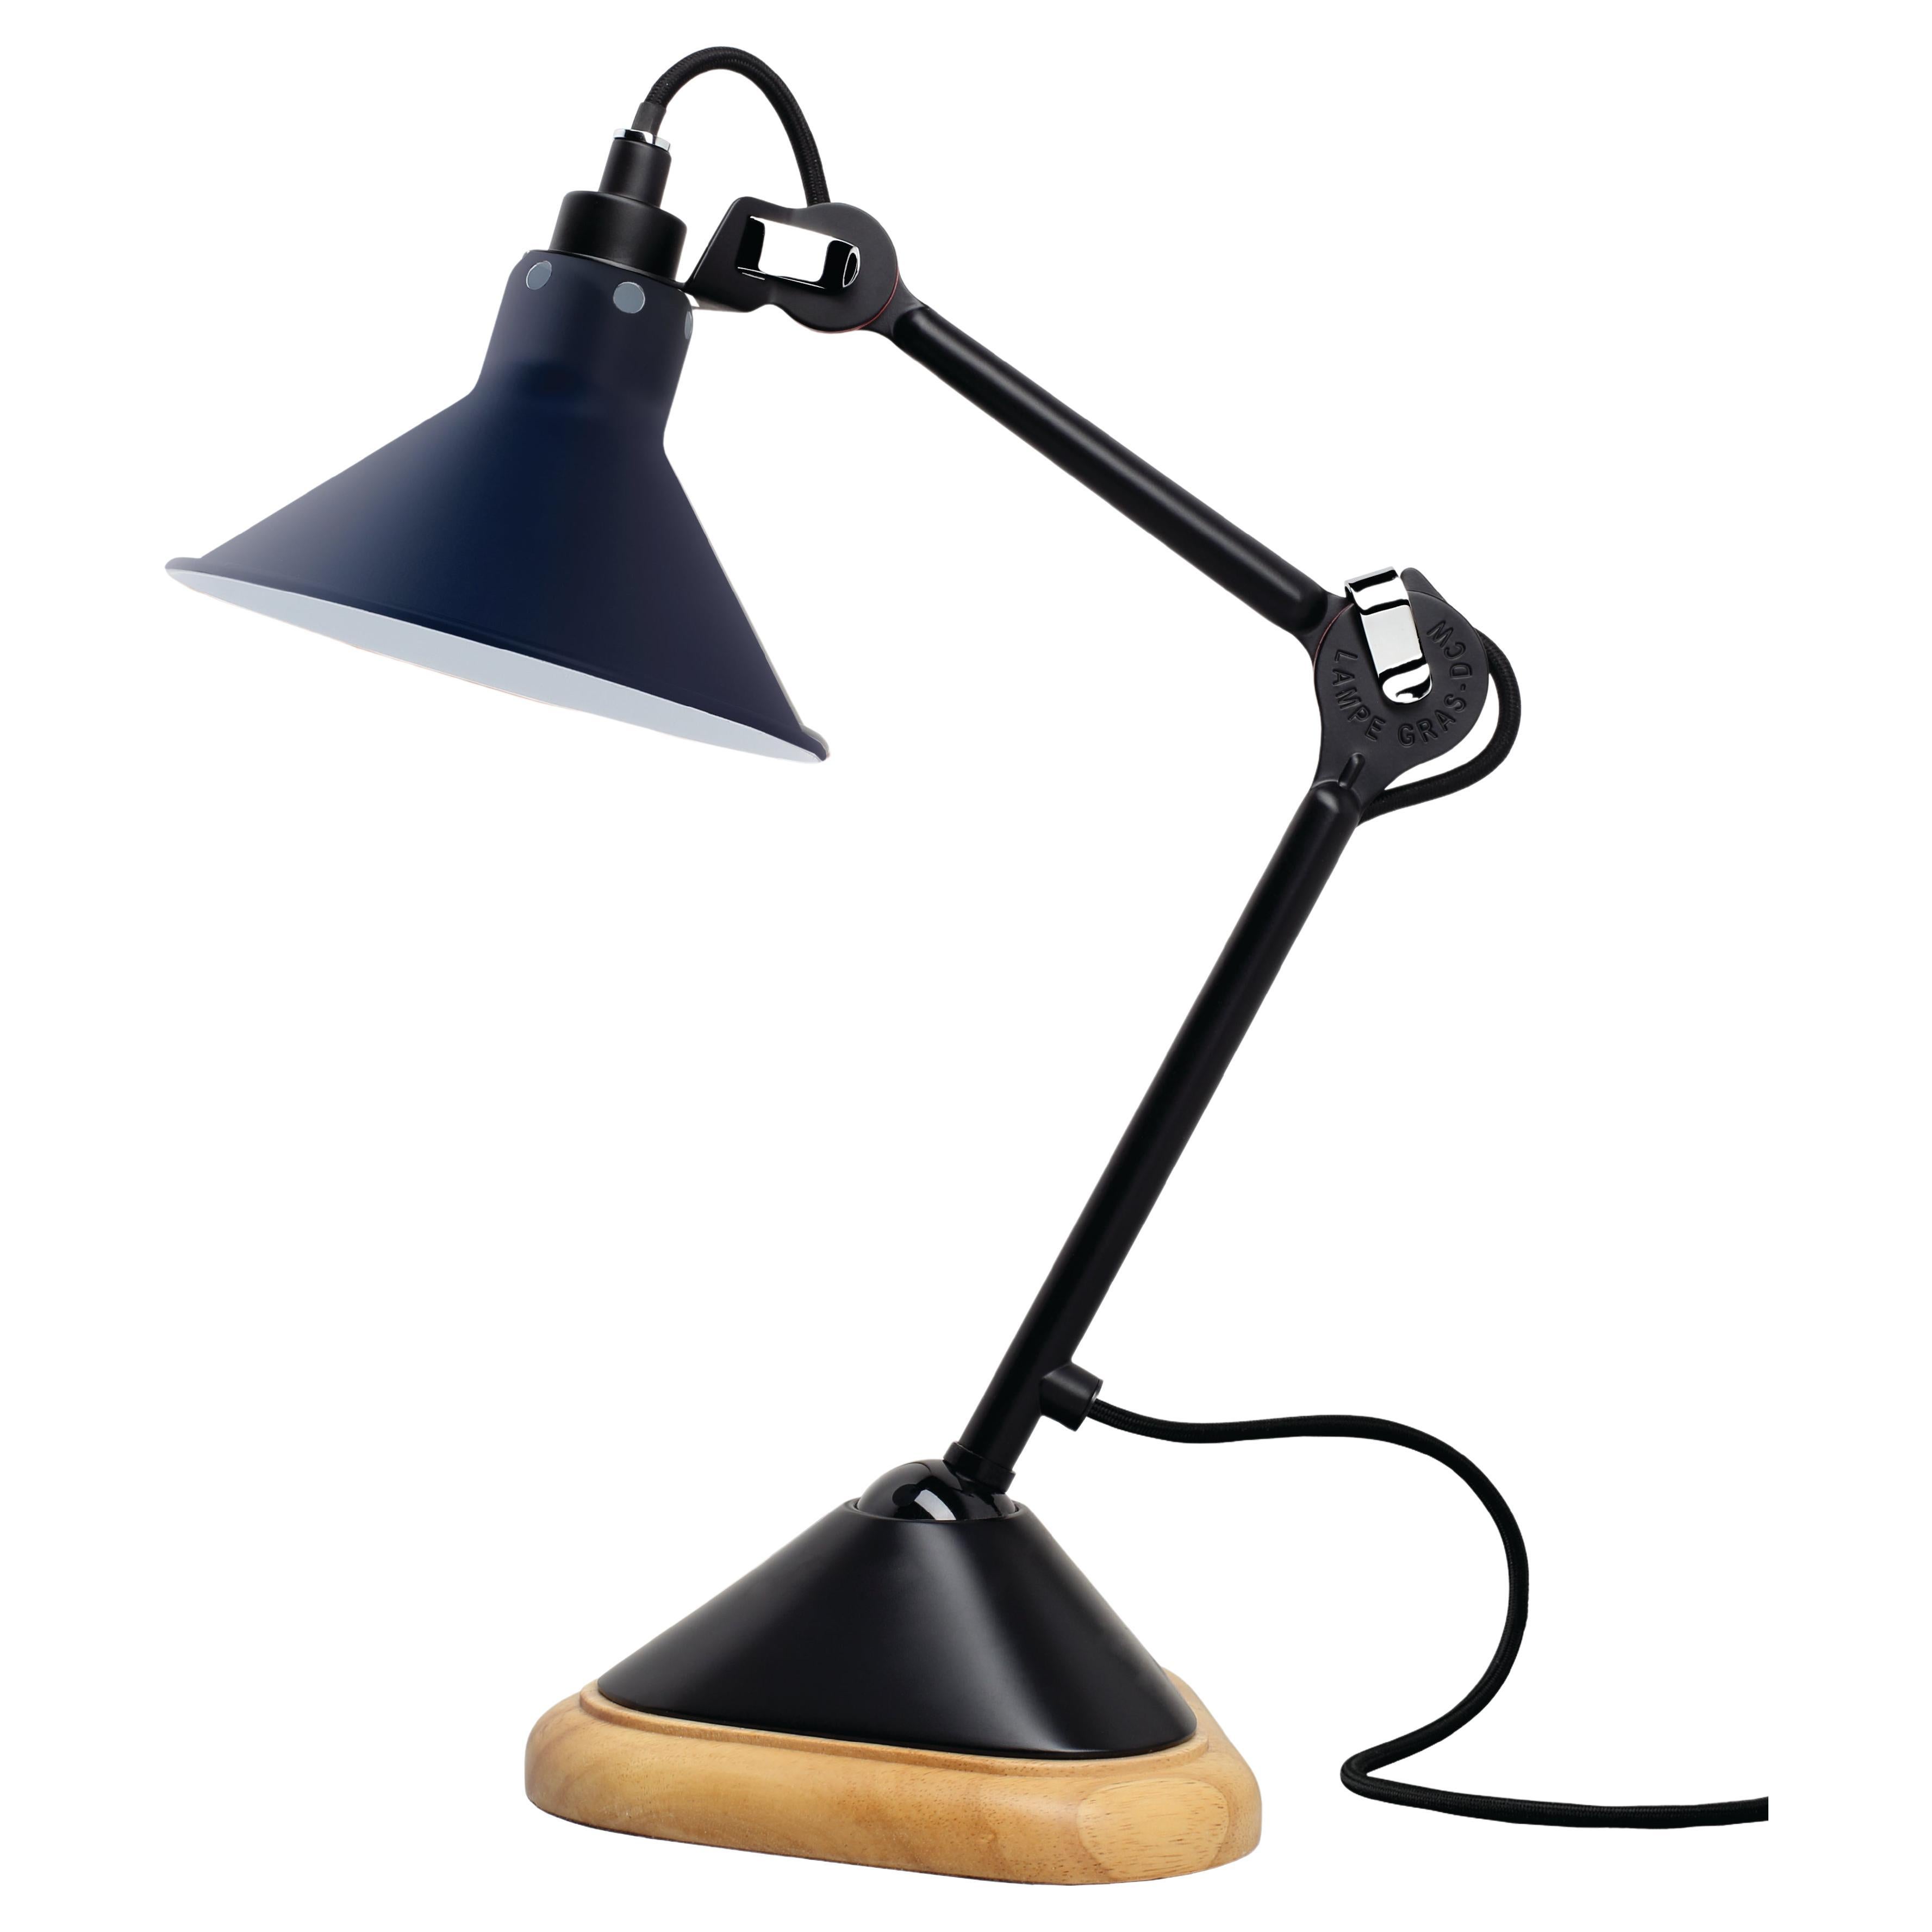 DCW Editions La Lampe Gras N°207 Conic Table Lamp in Black Arm with Blue Shade